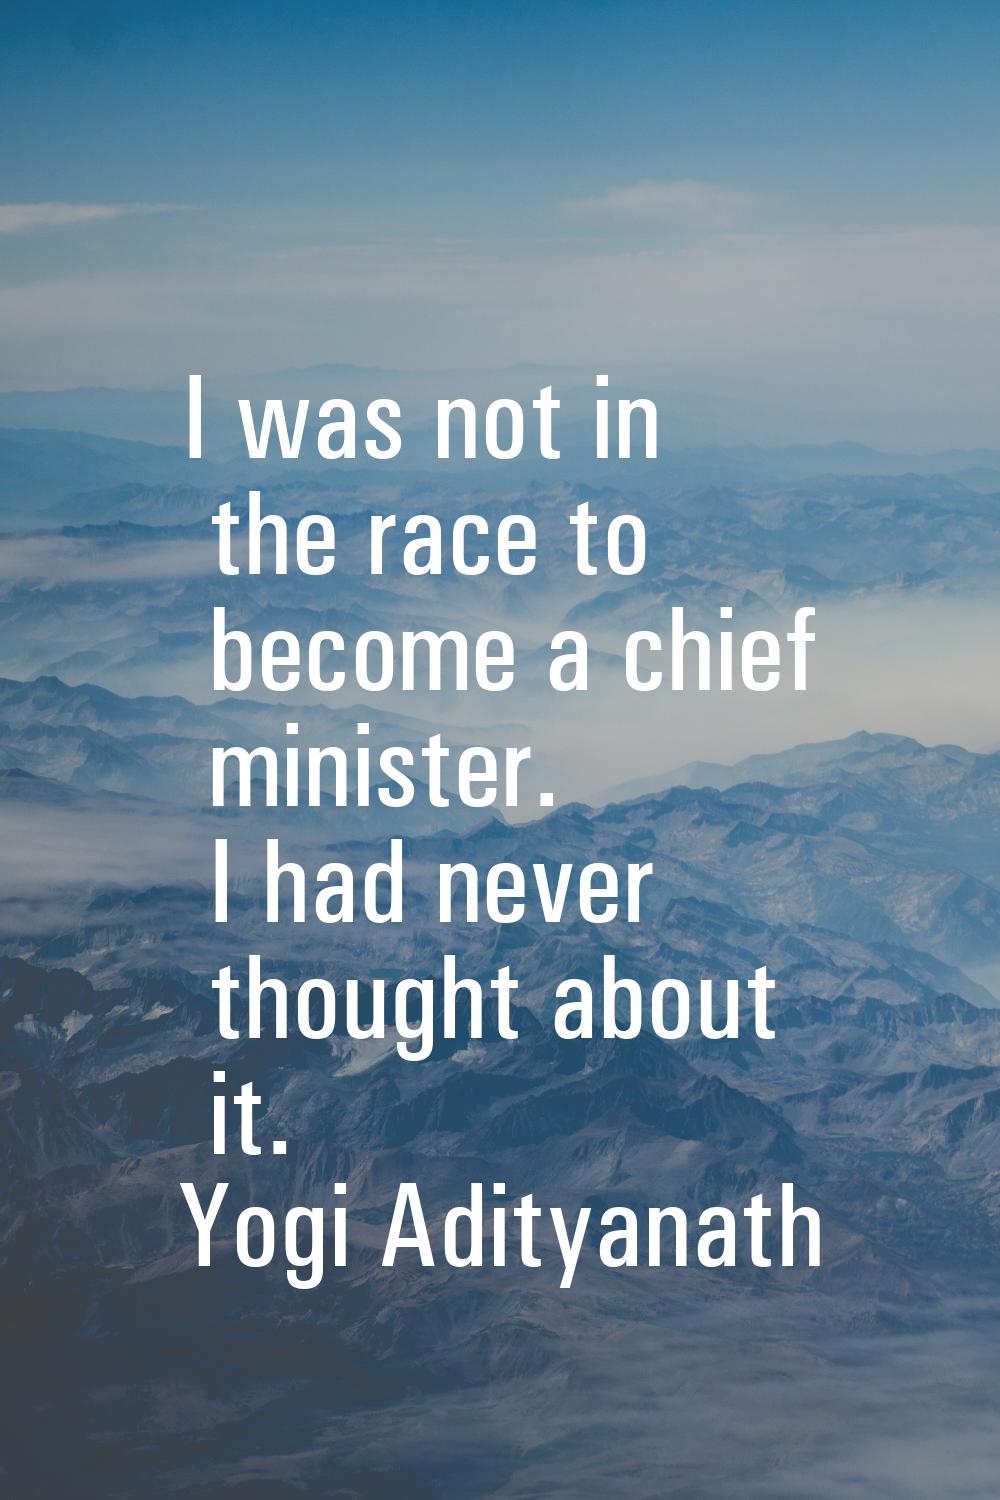 I was not in the race to become a chief minister. I had never thought about it.